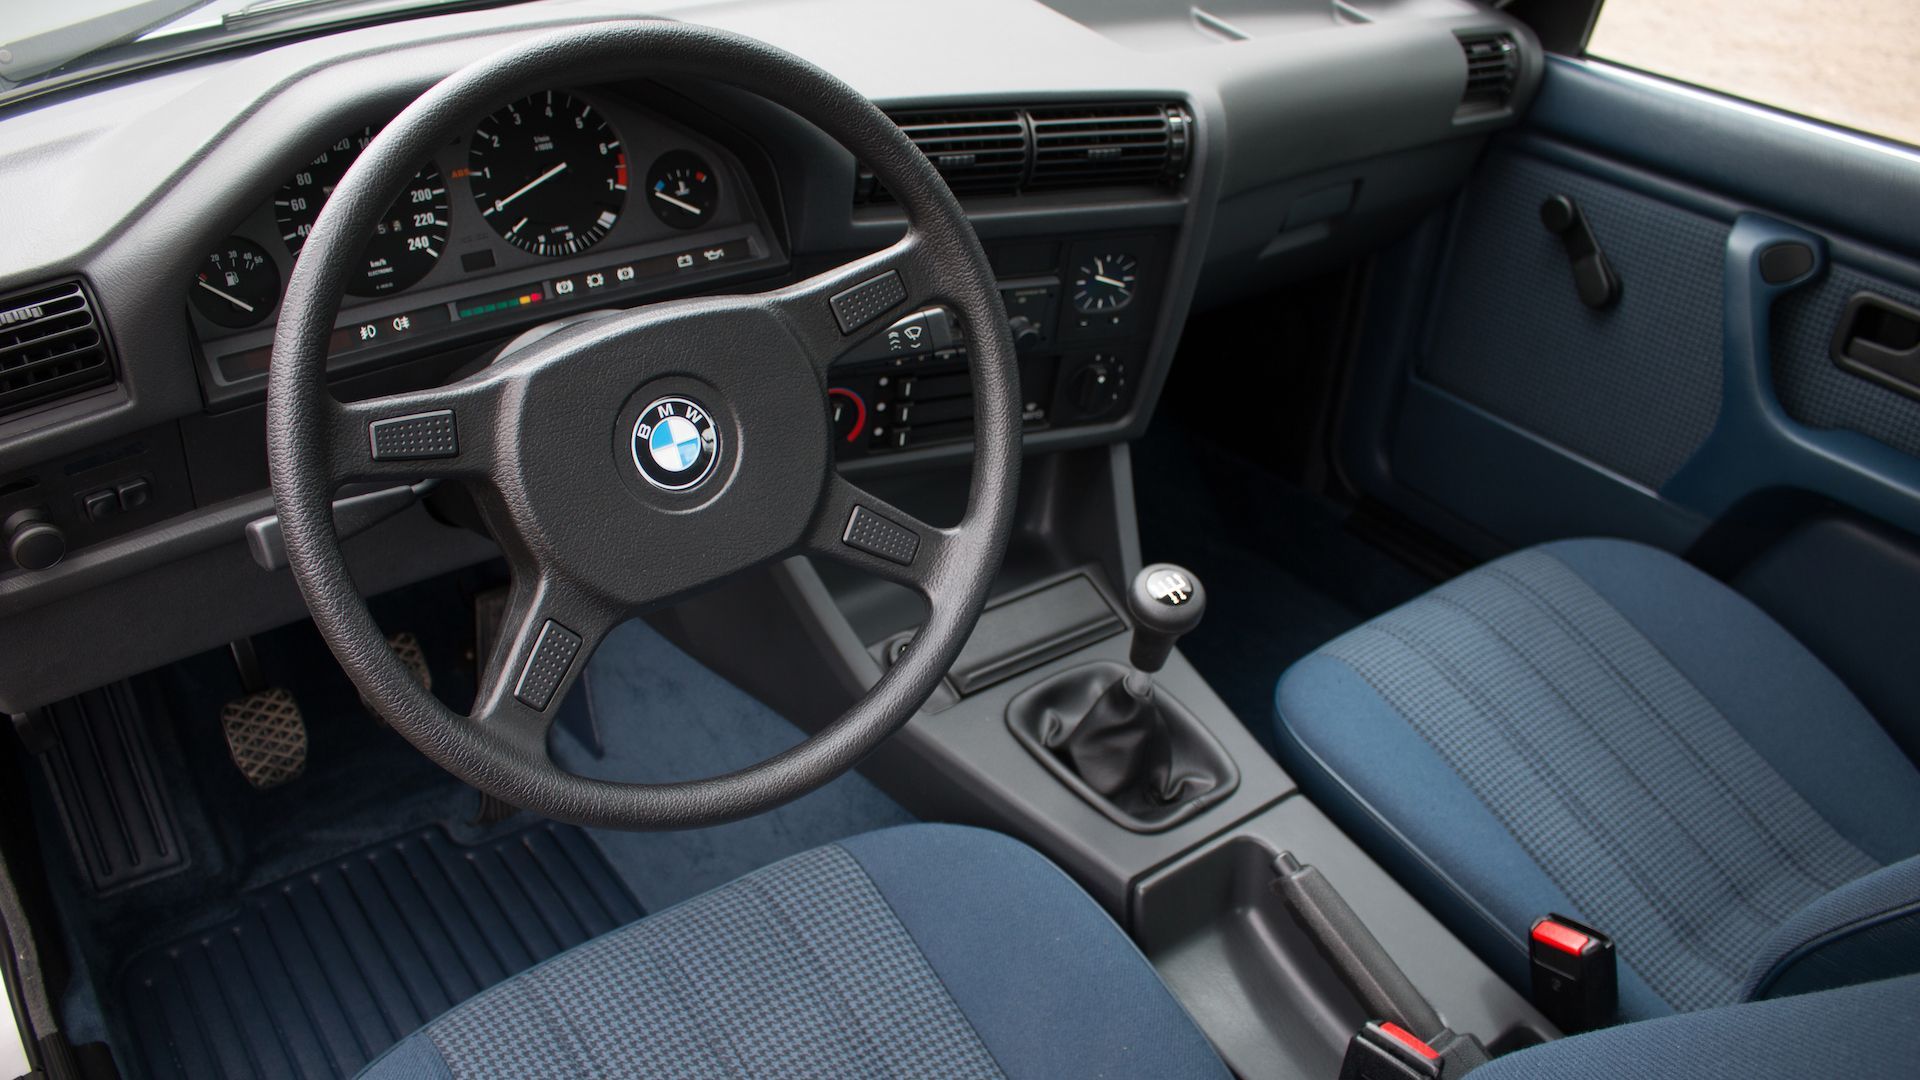 Dealer Selling 1986 BMW 325iX With 325 Miles 